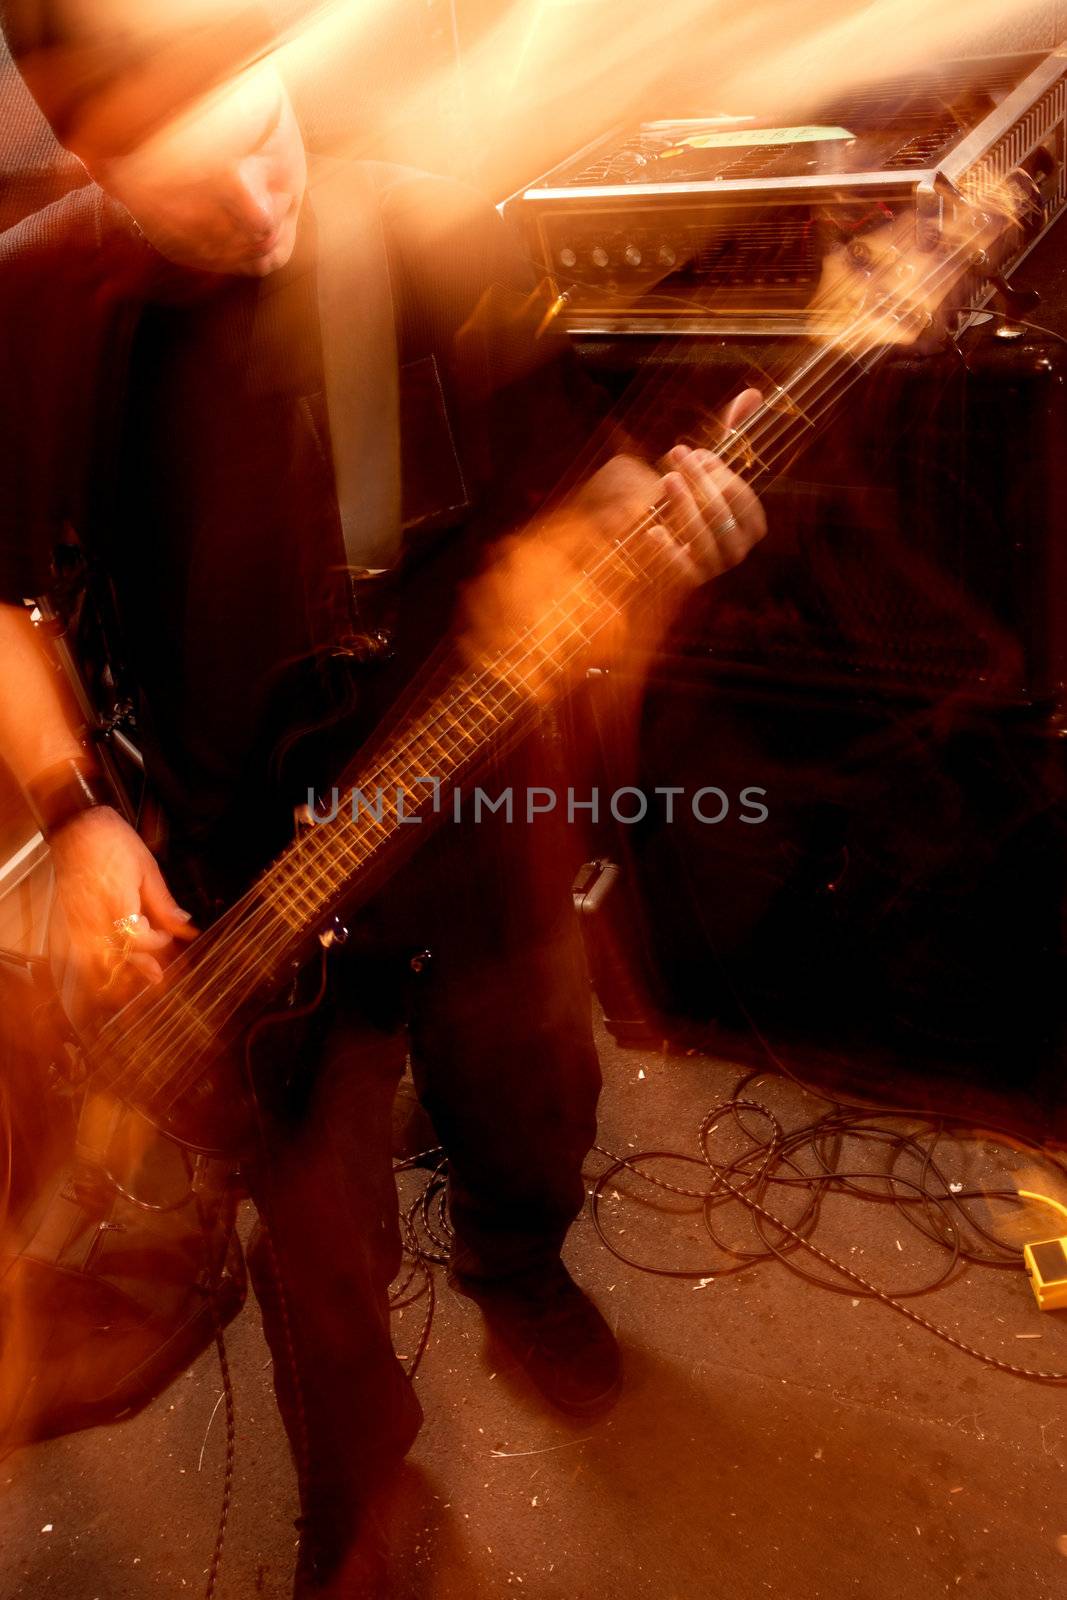 Blurry atmospheric abstract noisy hazy image of a bass player rippin' thru songs. Shot with slow shutter speed and flash for lots of movement and effect.
